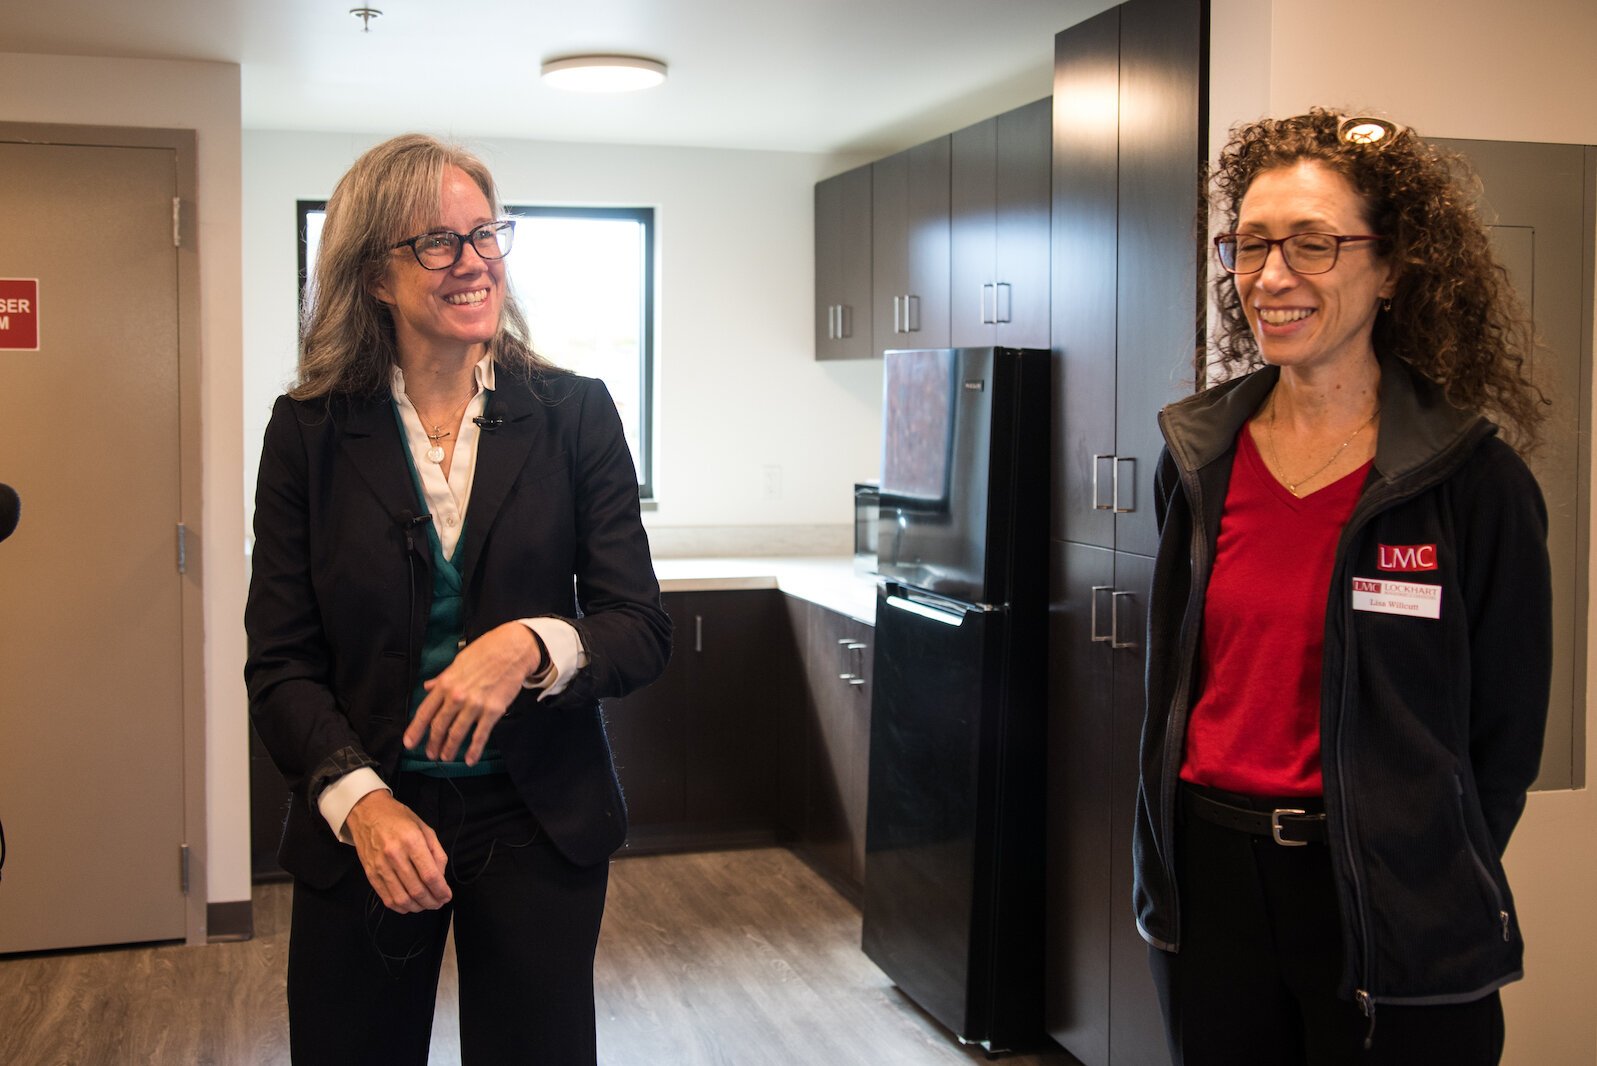 Carole McNees, left, is president of the LIFT Foundation Board of Directors. She is shown speaking with Lisa Willcutt, who is principal at Lockhart Management & Consulting LLC, the firm contracted to oversee the management of the new apartment house.